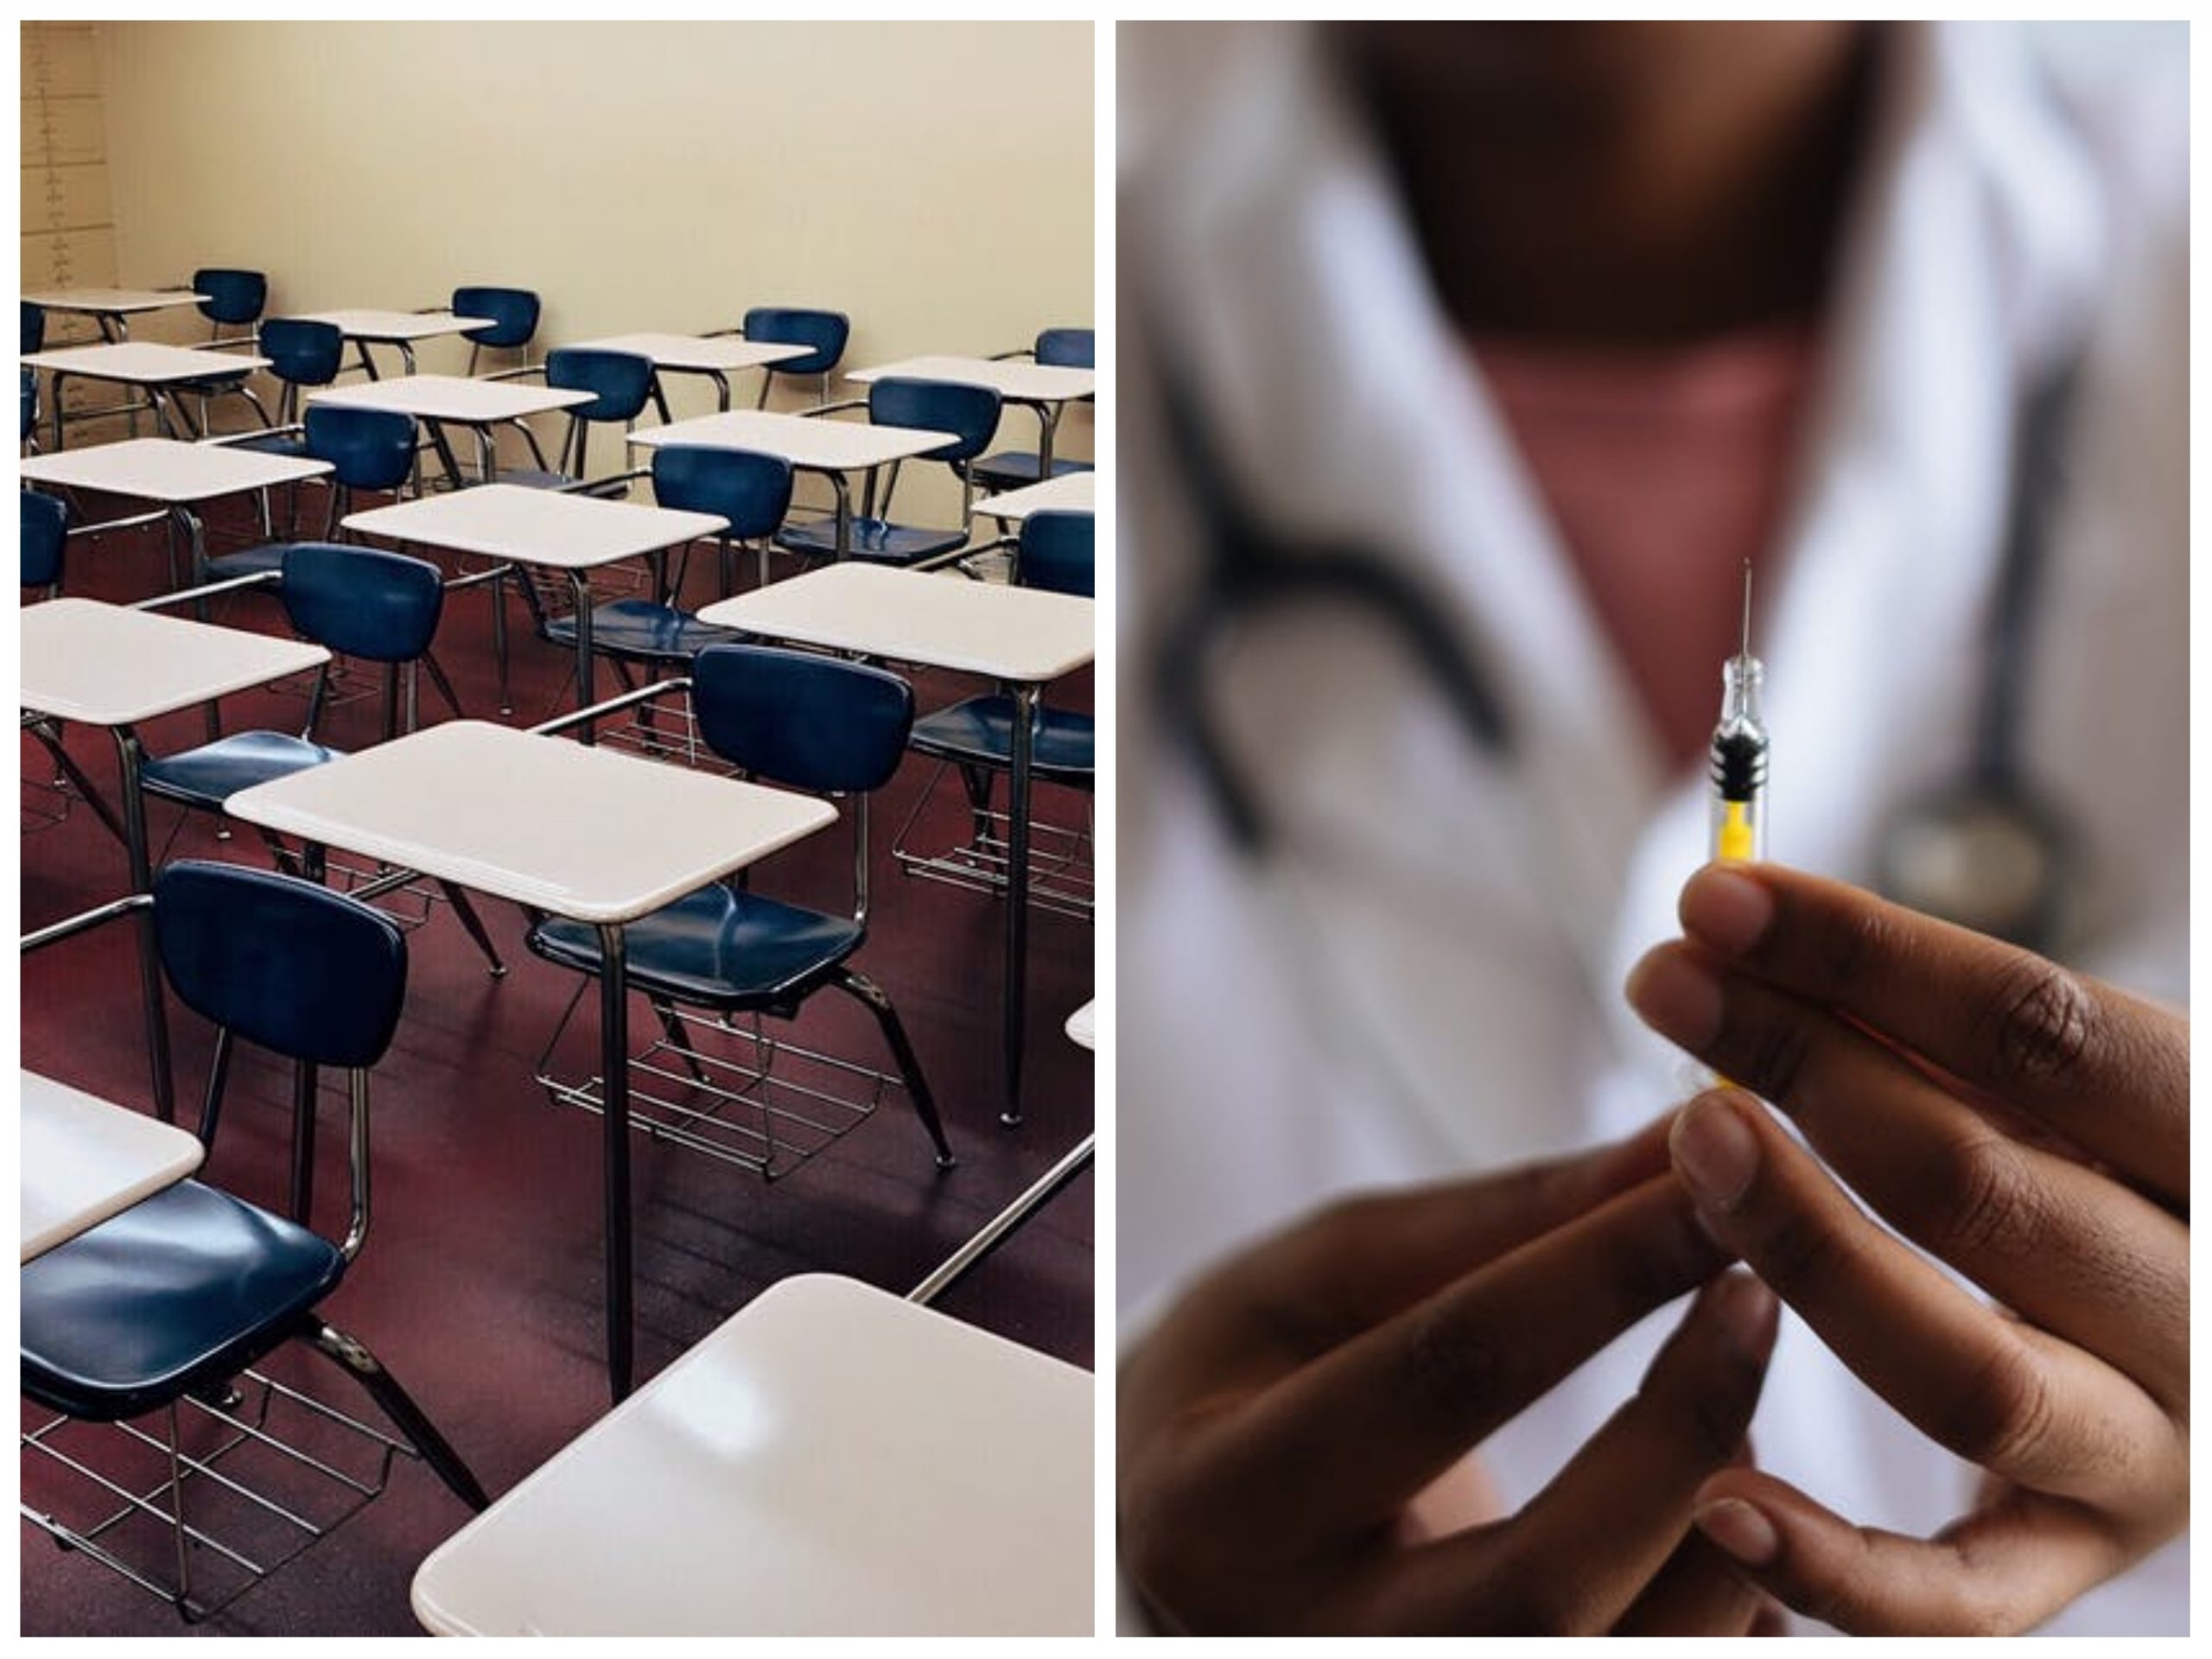 California Bill Would Require All School Kids To Be Vaccinated